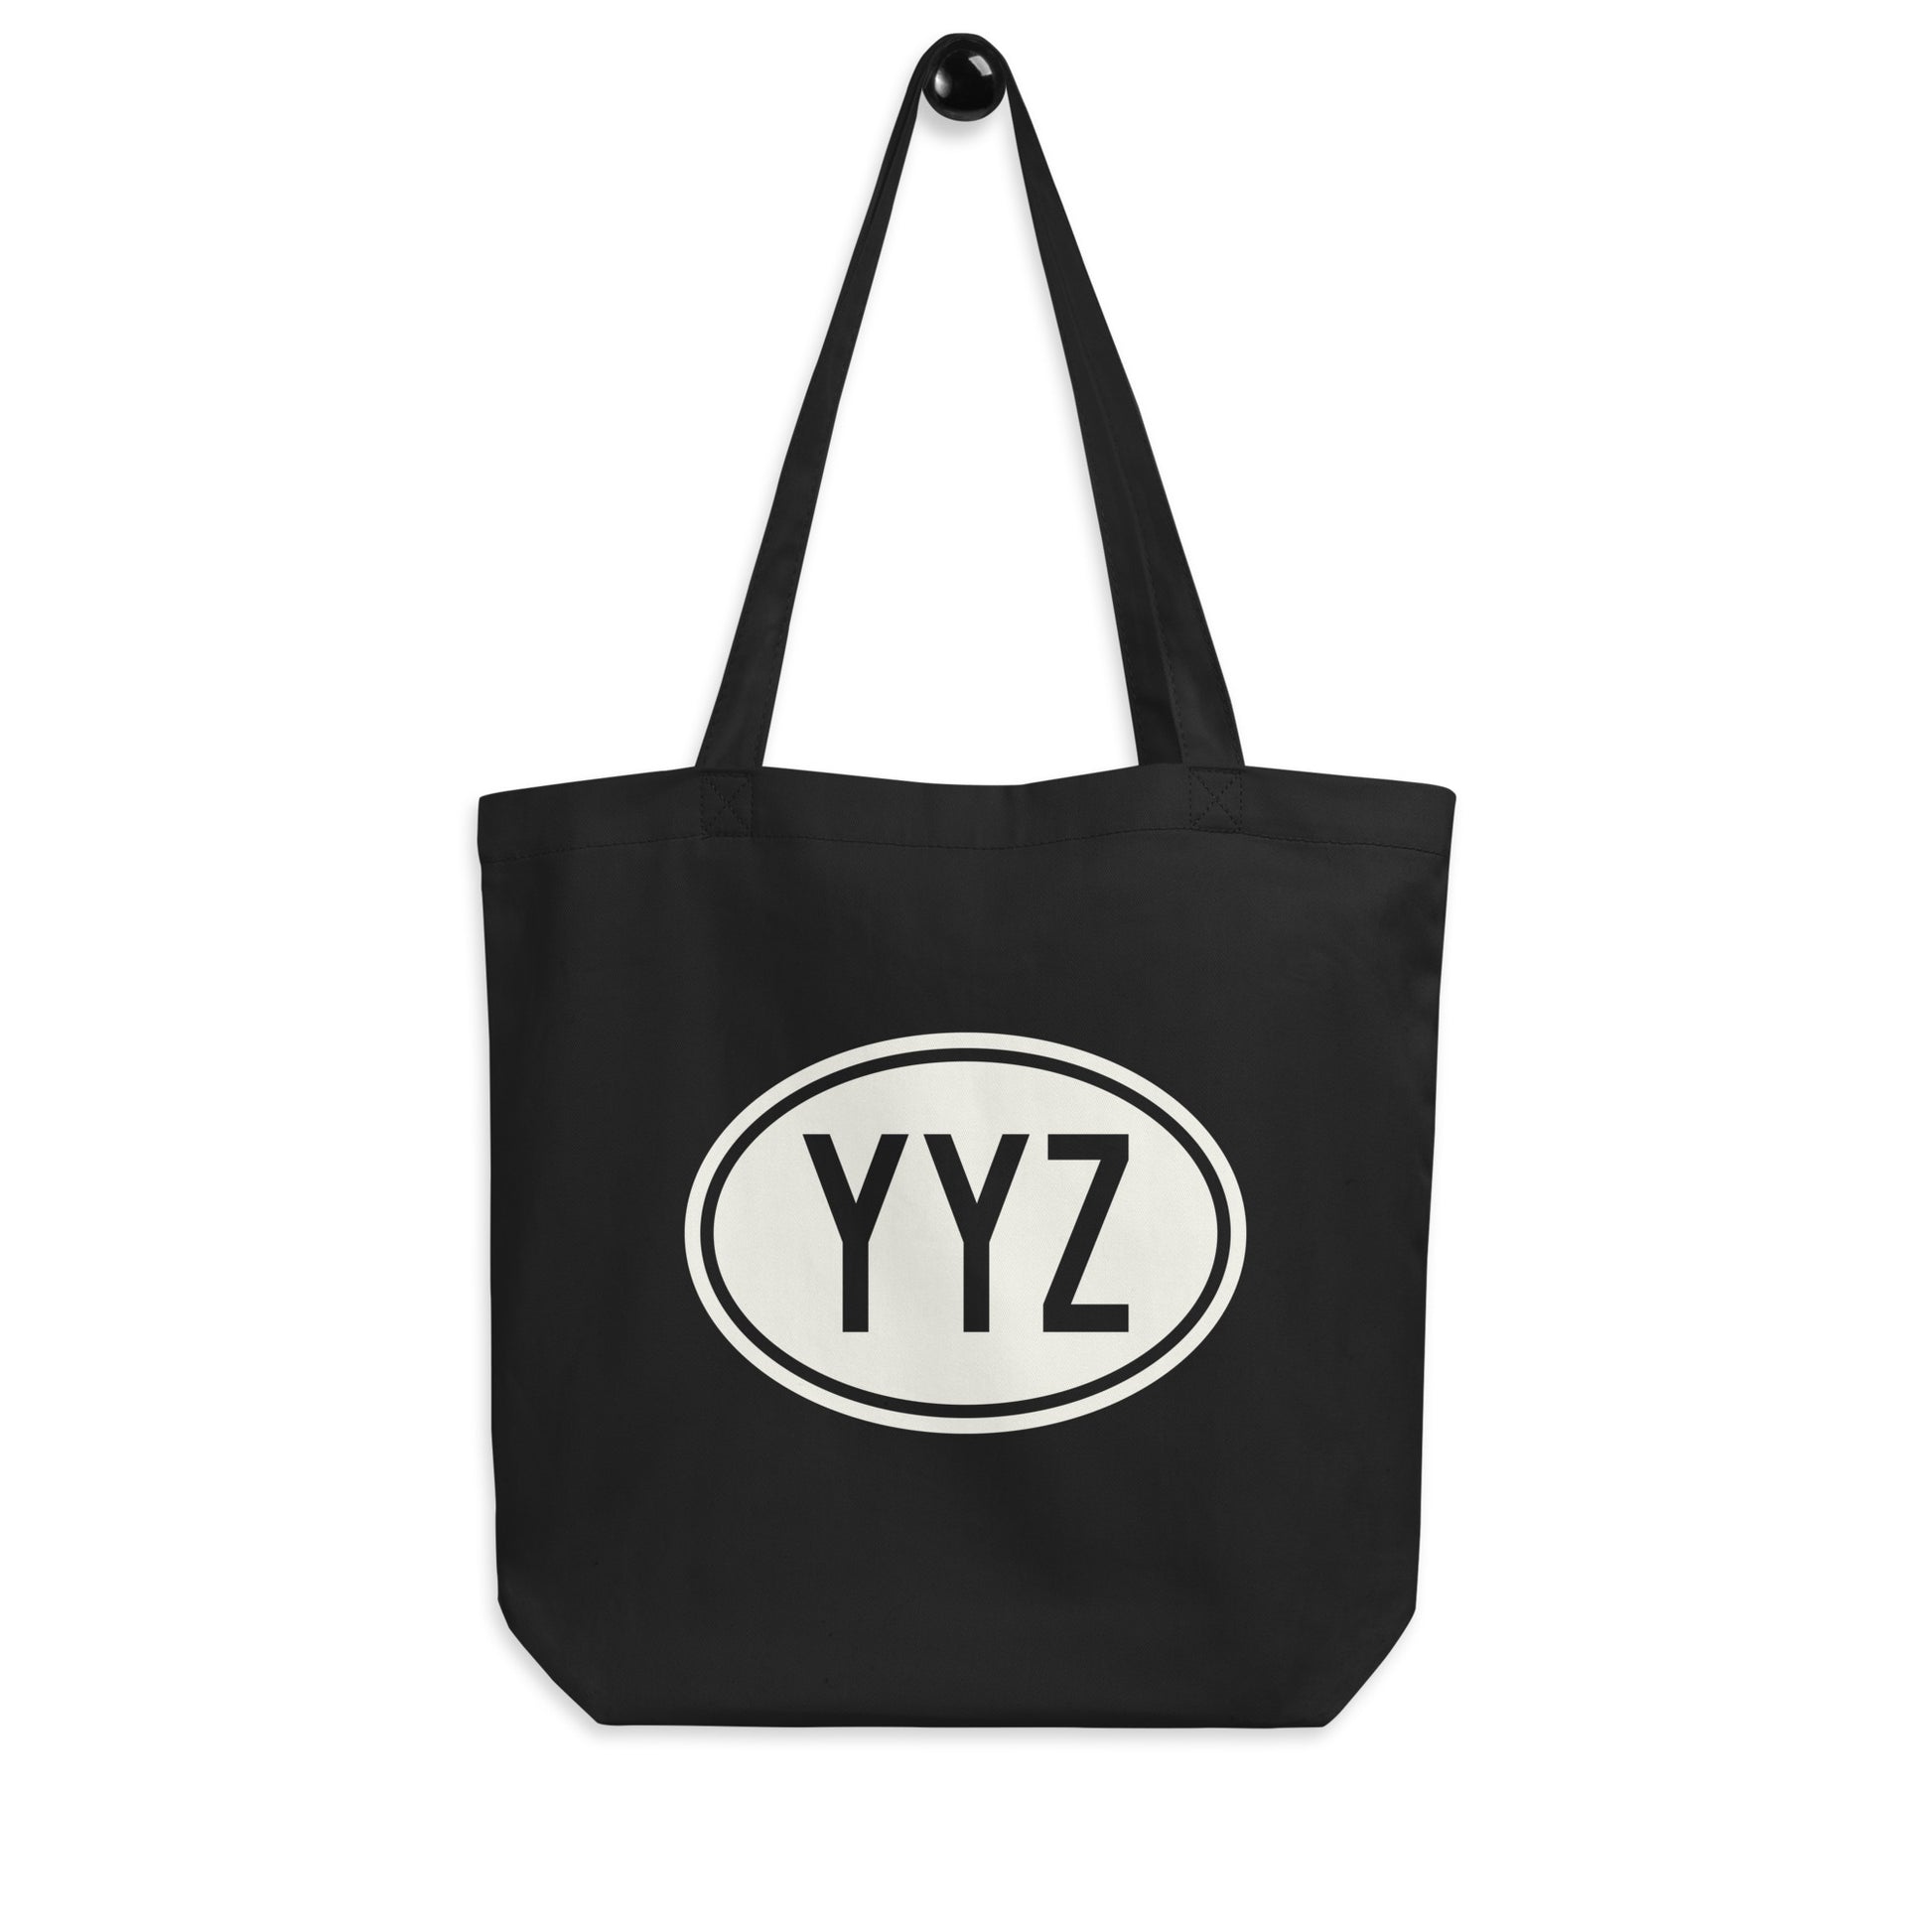 Unique Travel Gift Organic Tote - White Oval • YYZ Toronto • YHM Designs - Image 04